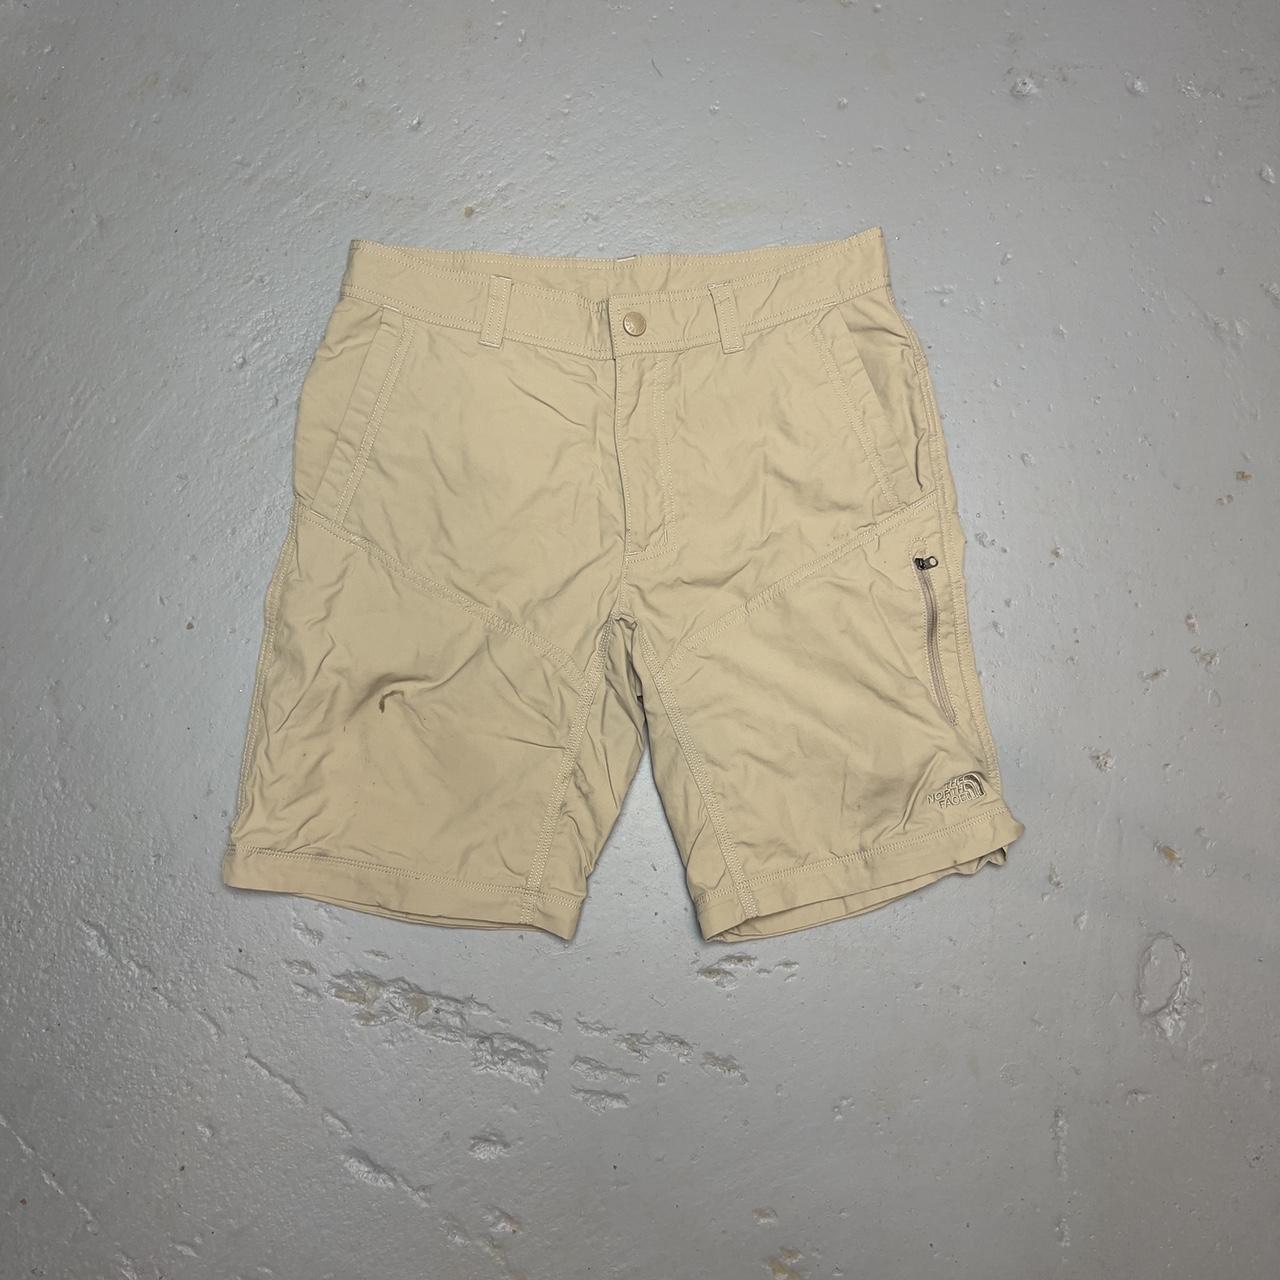 The North Face Men's Cream and Tan Shorts